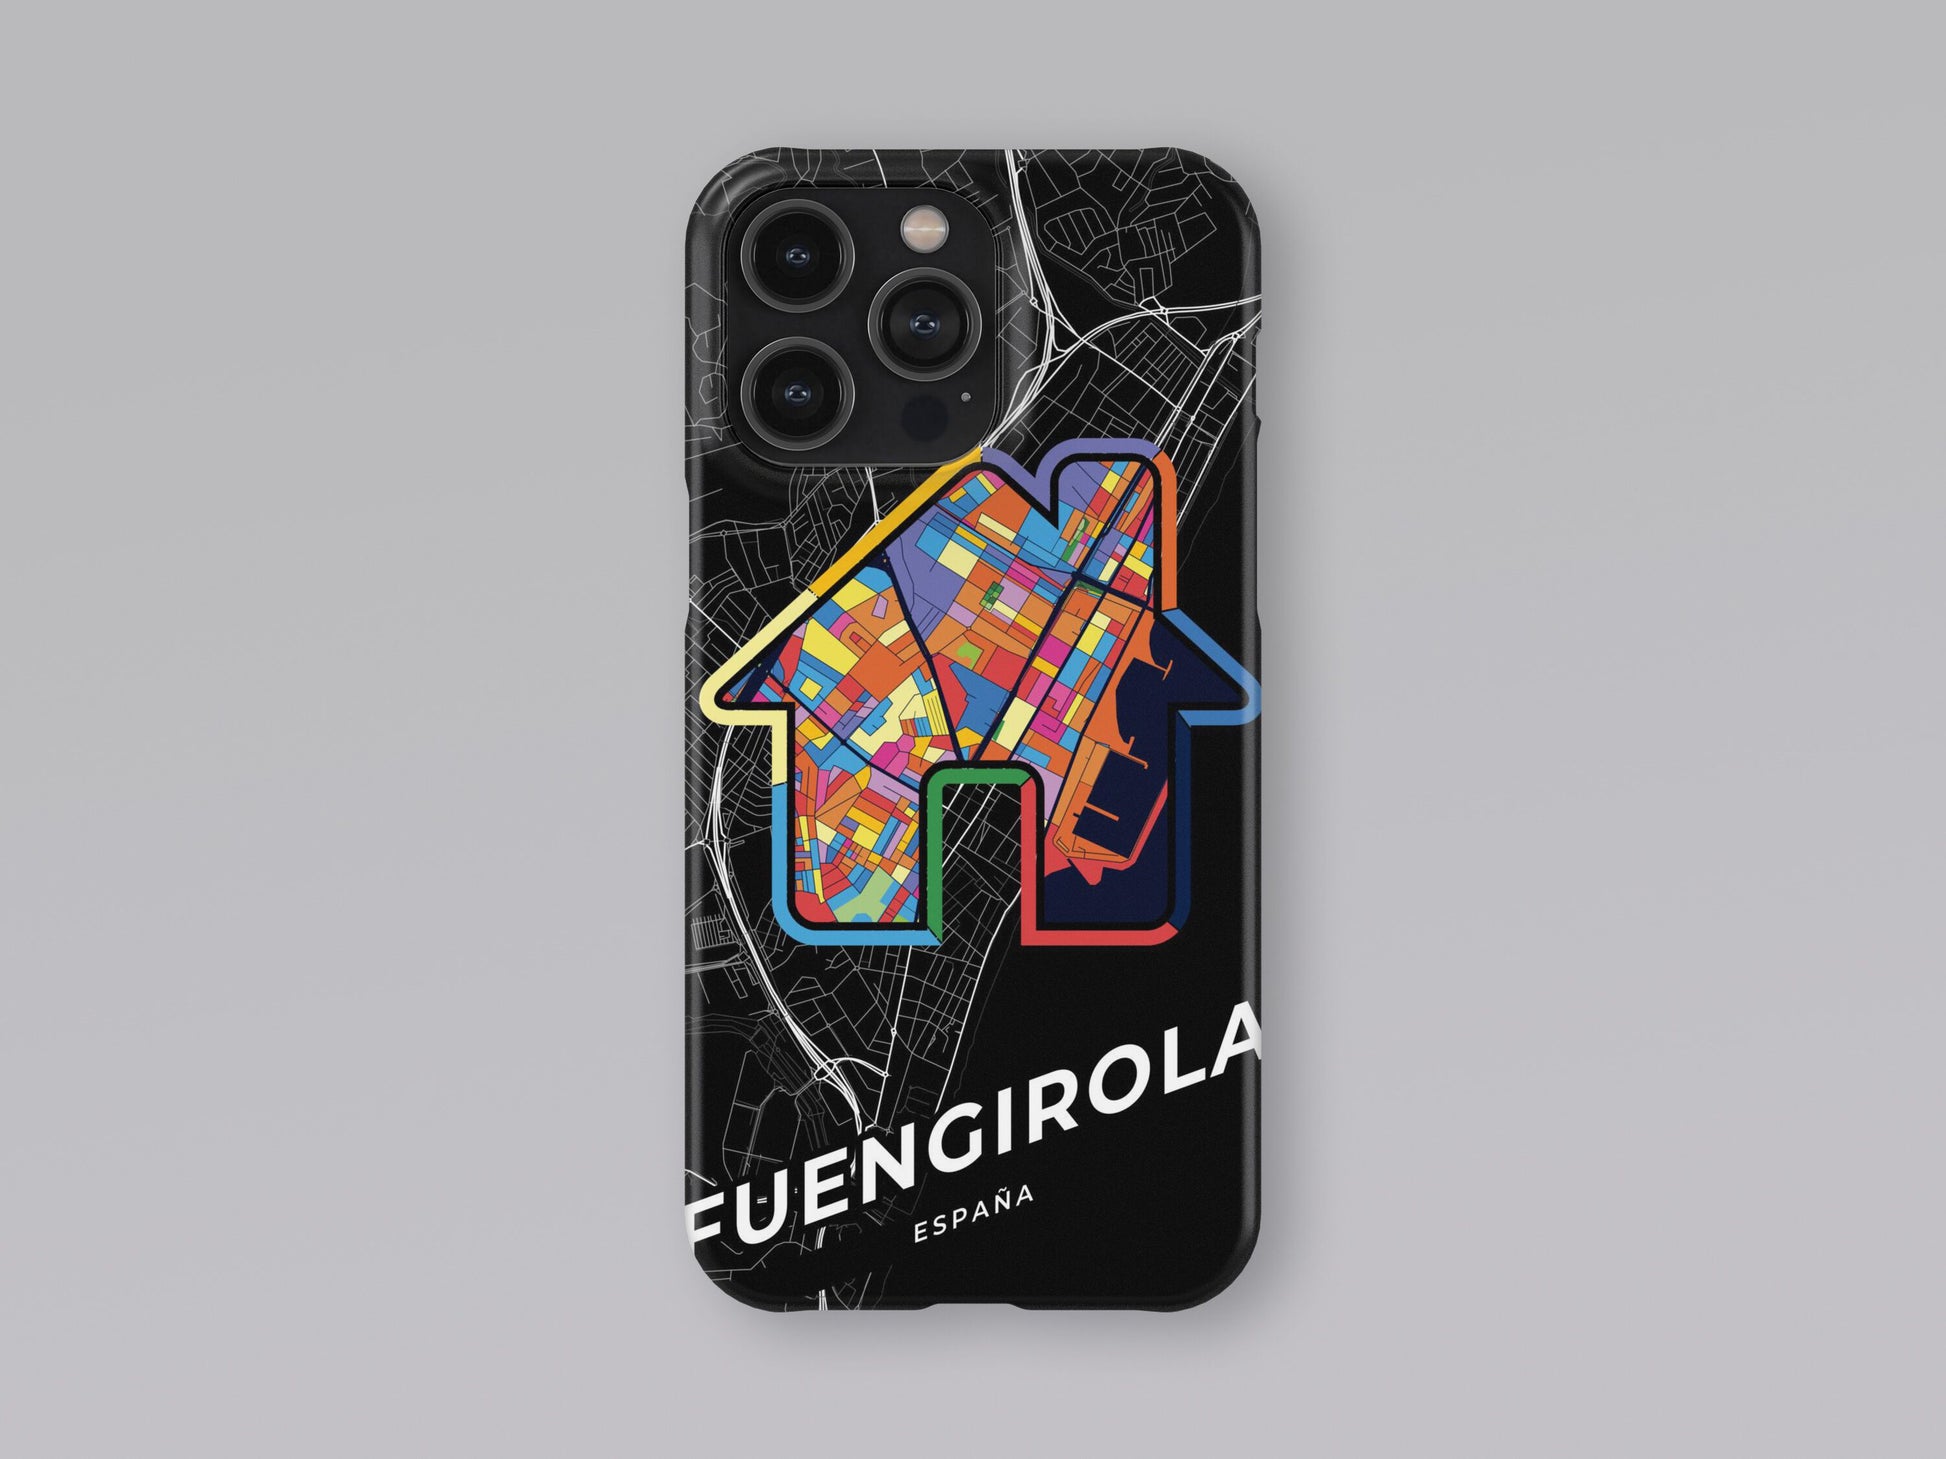 Fuengirola Spain slim phone case with colorful icon. Birthday, wedding or housewarming gift. Couple match cases. 3